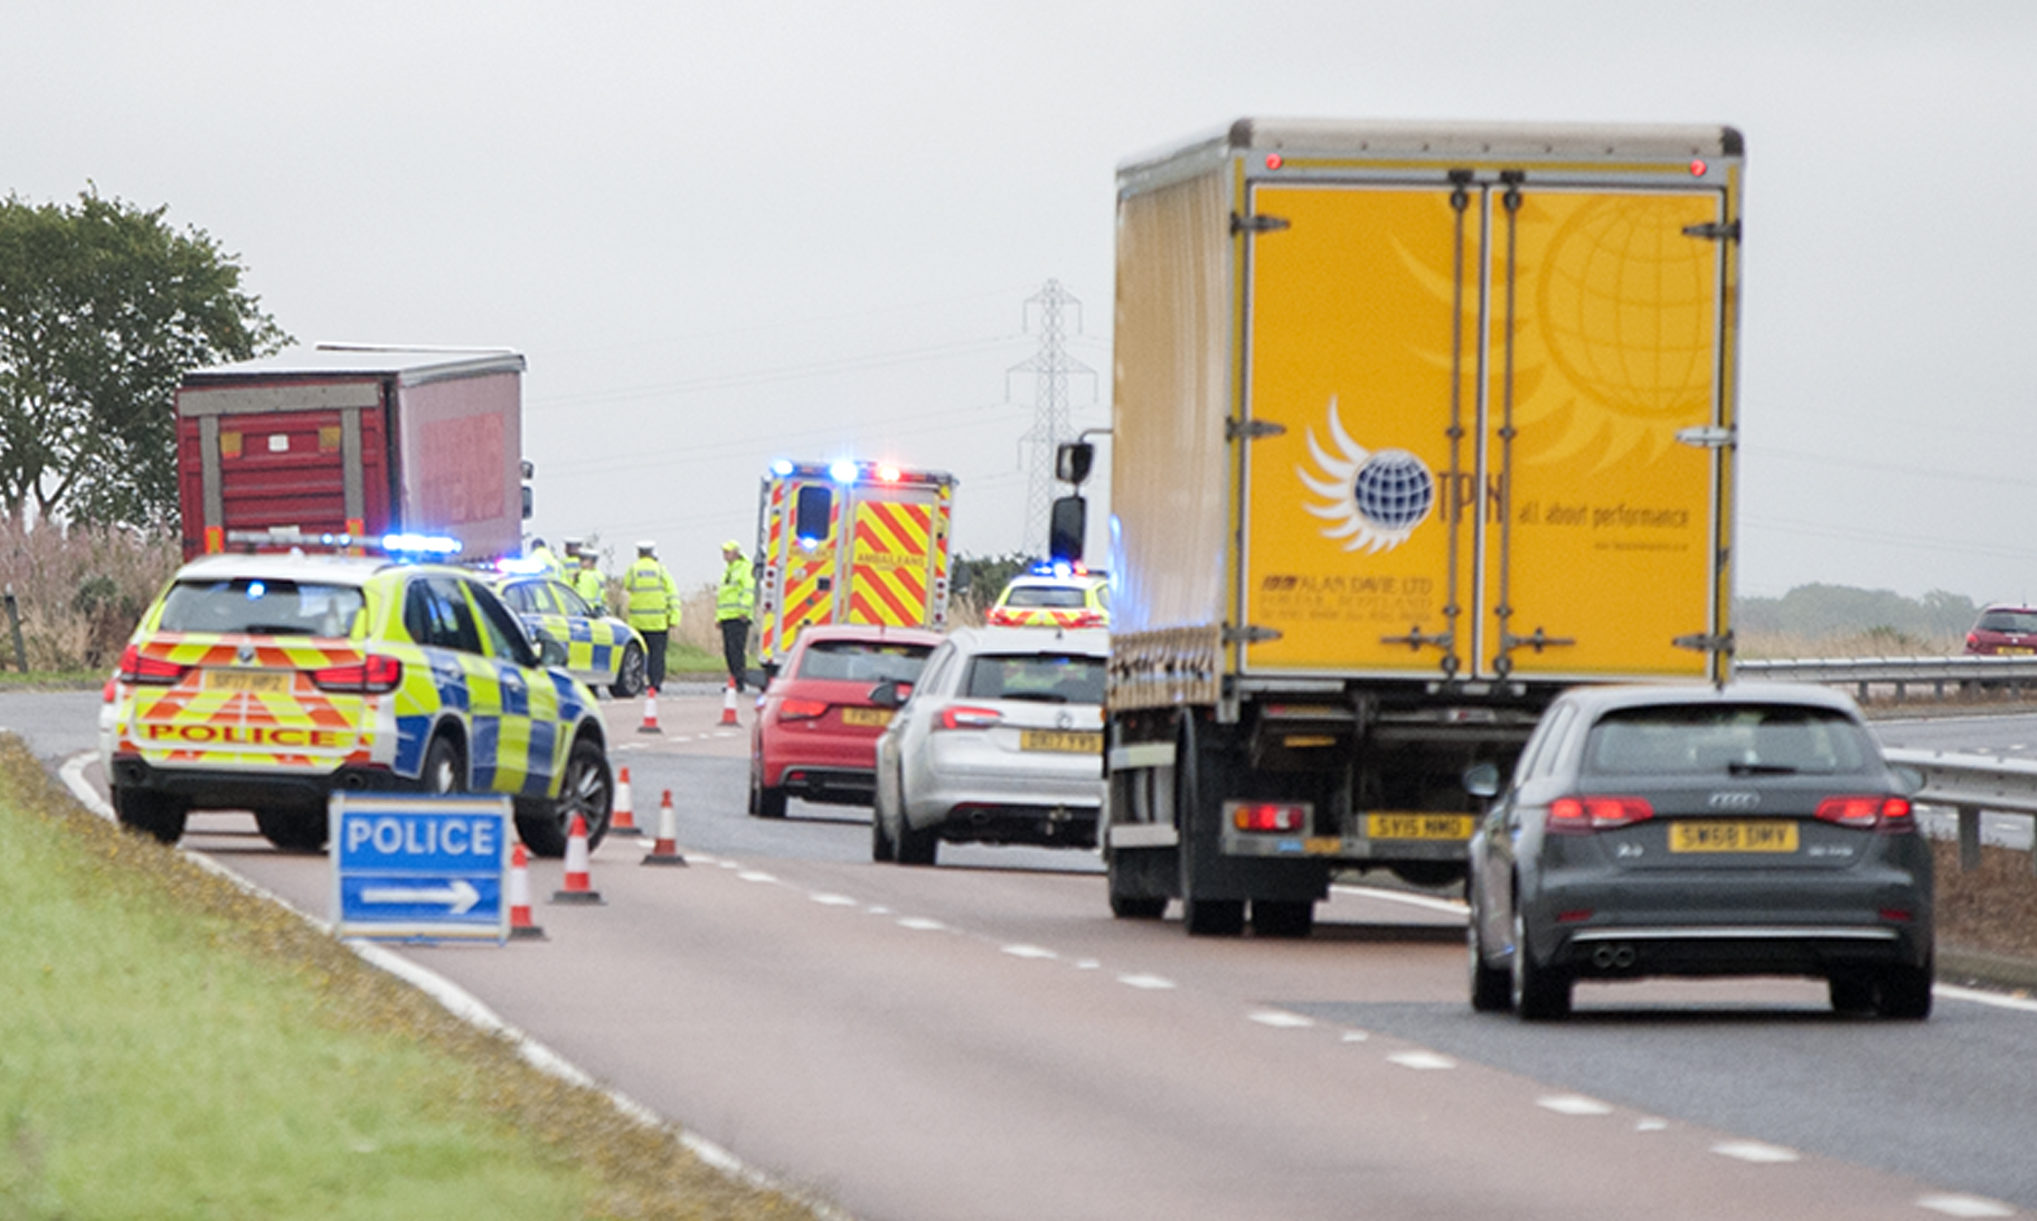 The scene of the fatal accident on the A90 near Brechin.